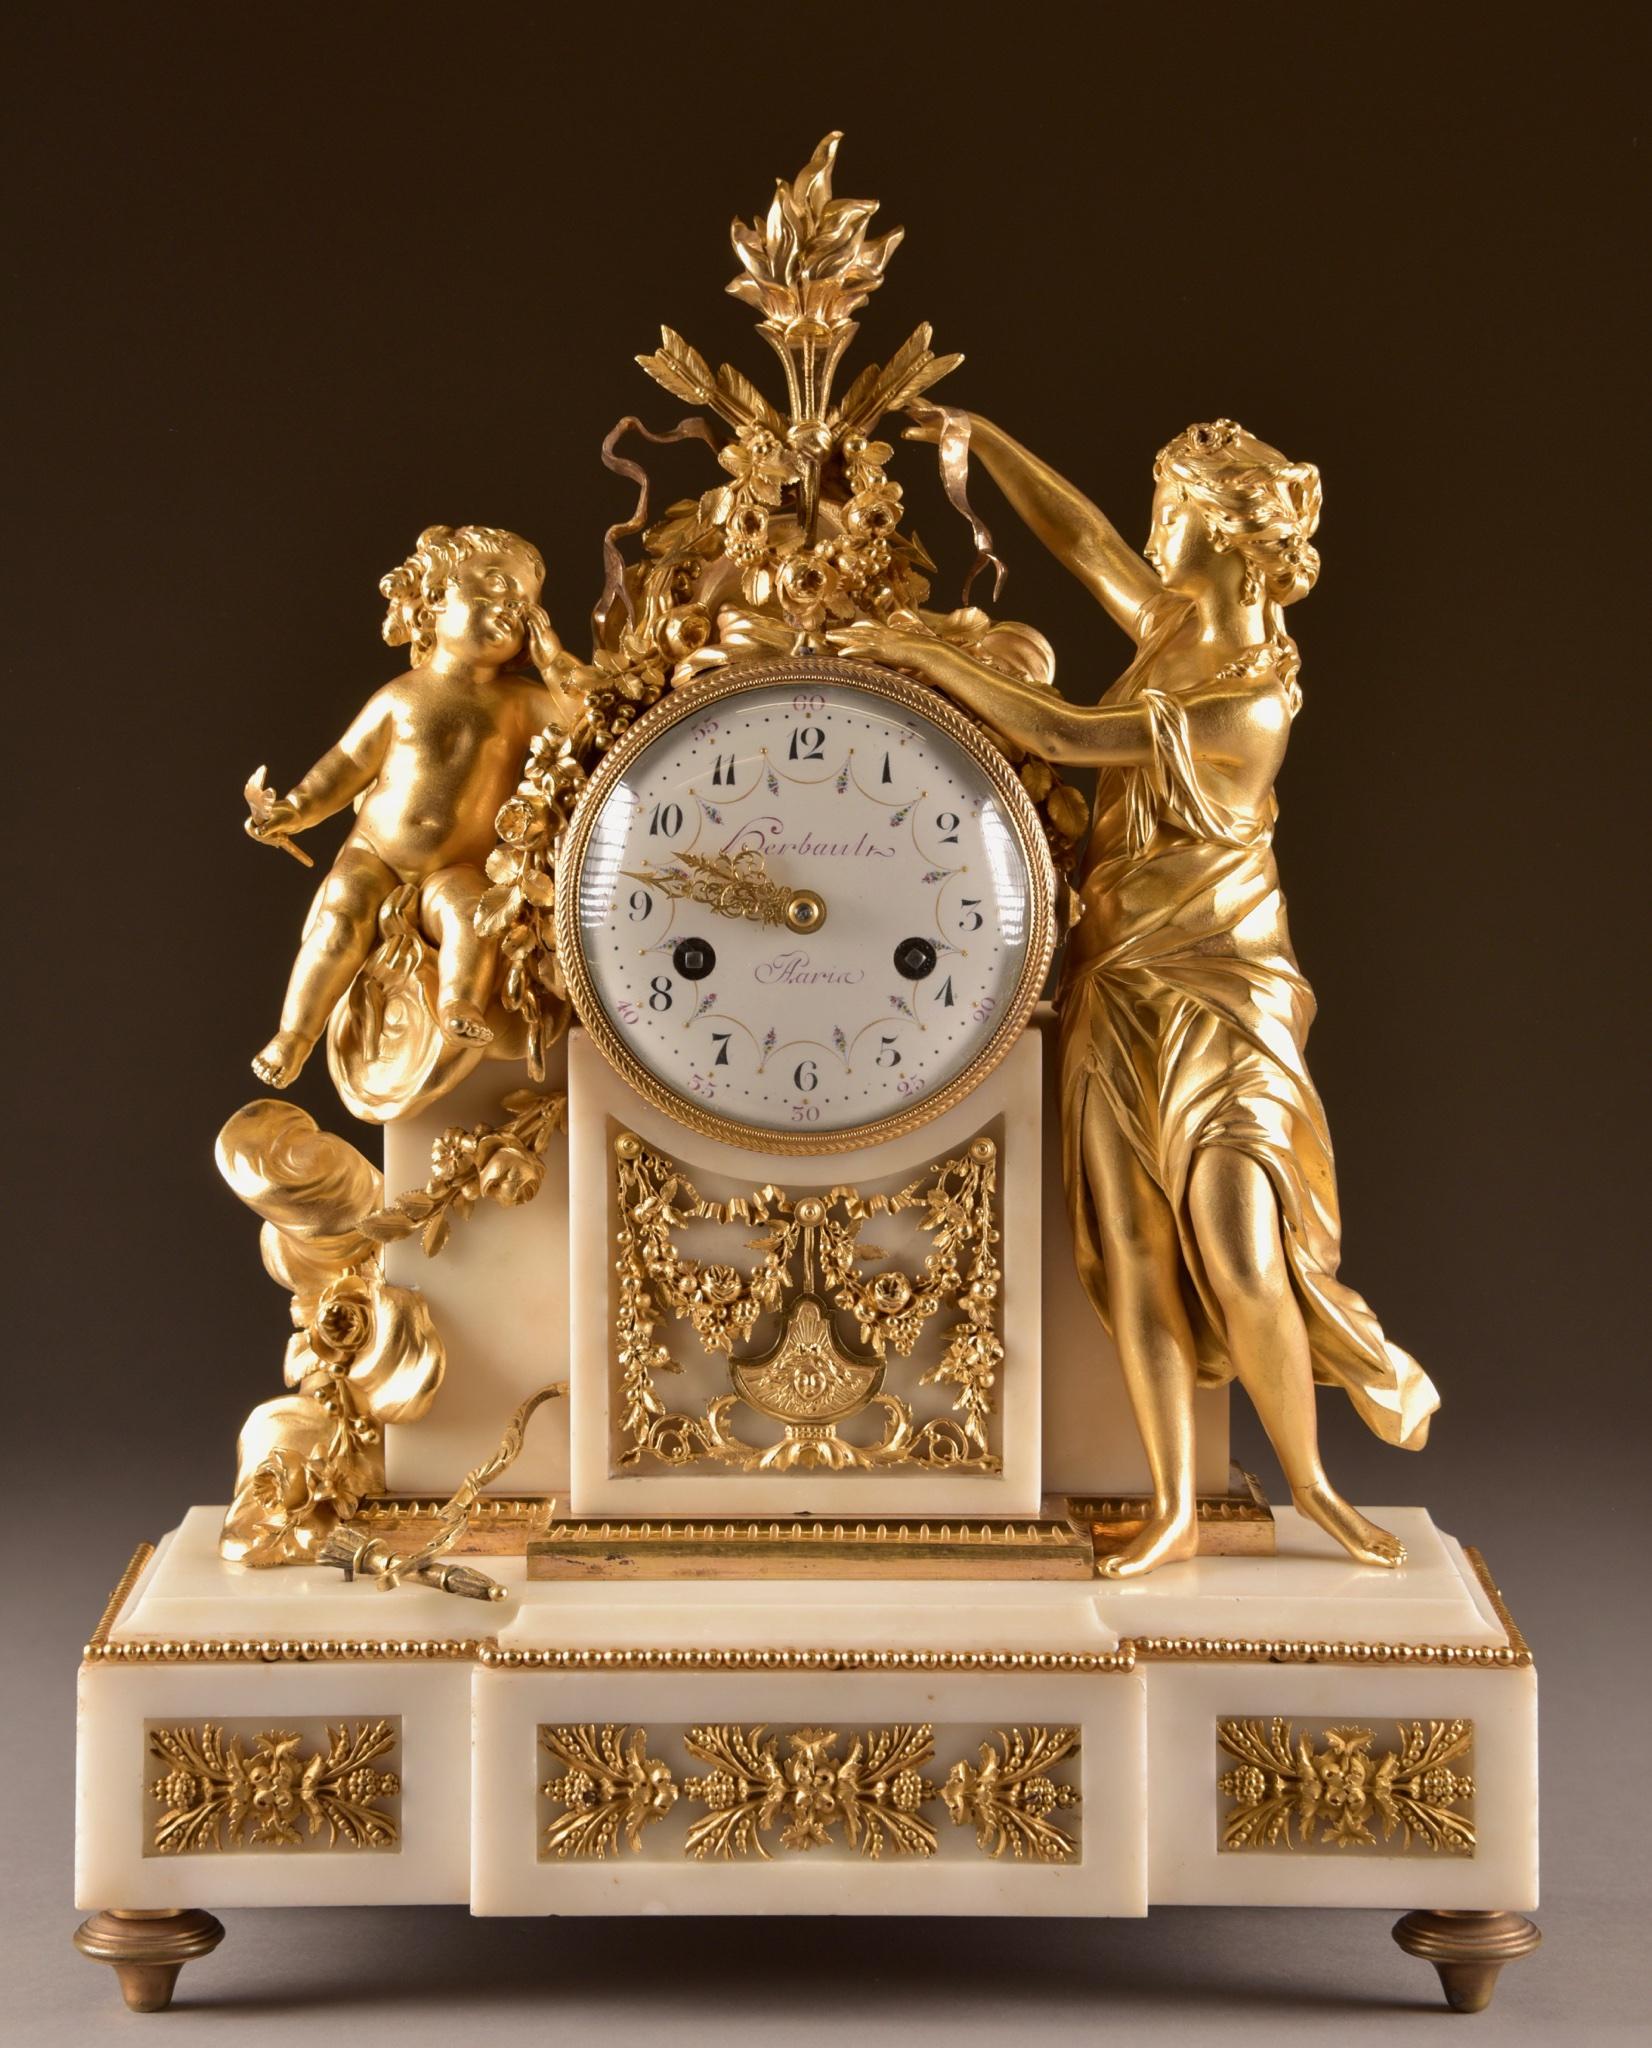 Very nice large and heavy Louis XVI pendulum. With beautiful images of Venus (Goddess of love) and a Cherub. known from the book: DIE FRANZÖSISCHE BRONZEUHR!, pag. 131.

This clock comes with a key and a pendulum. Clockwork has recently been checked